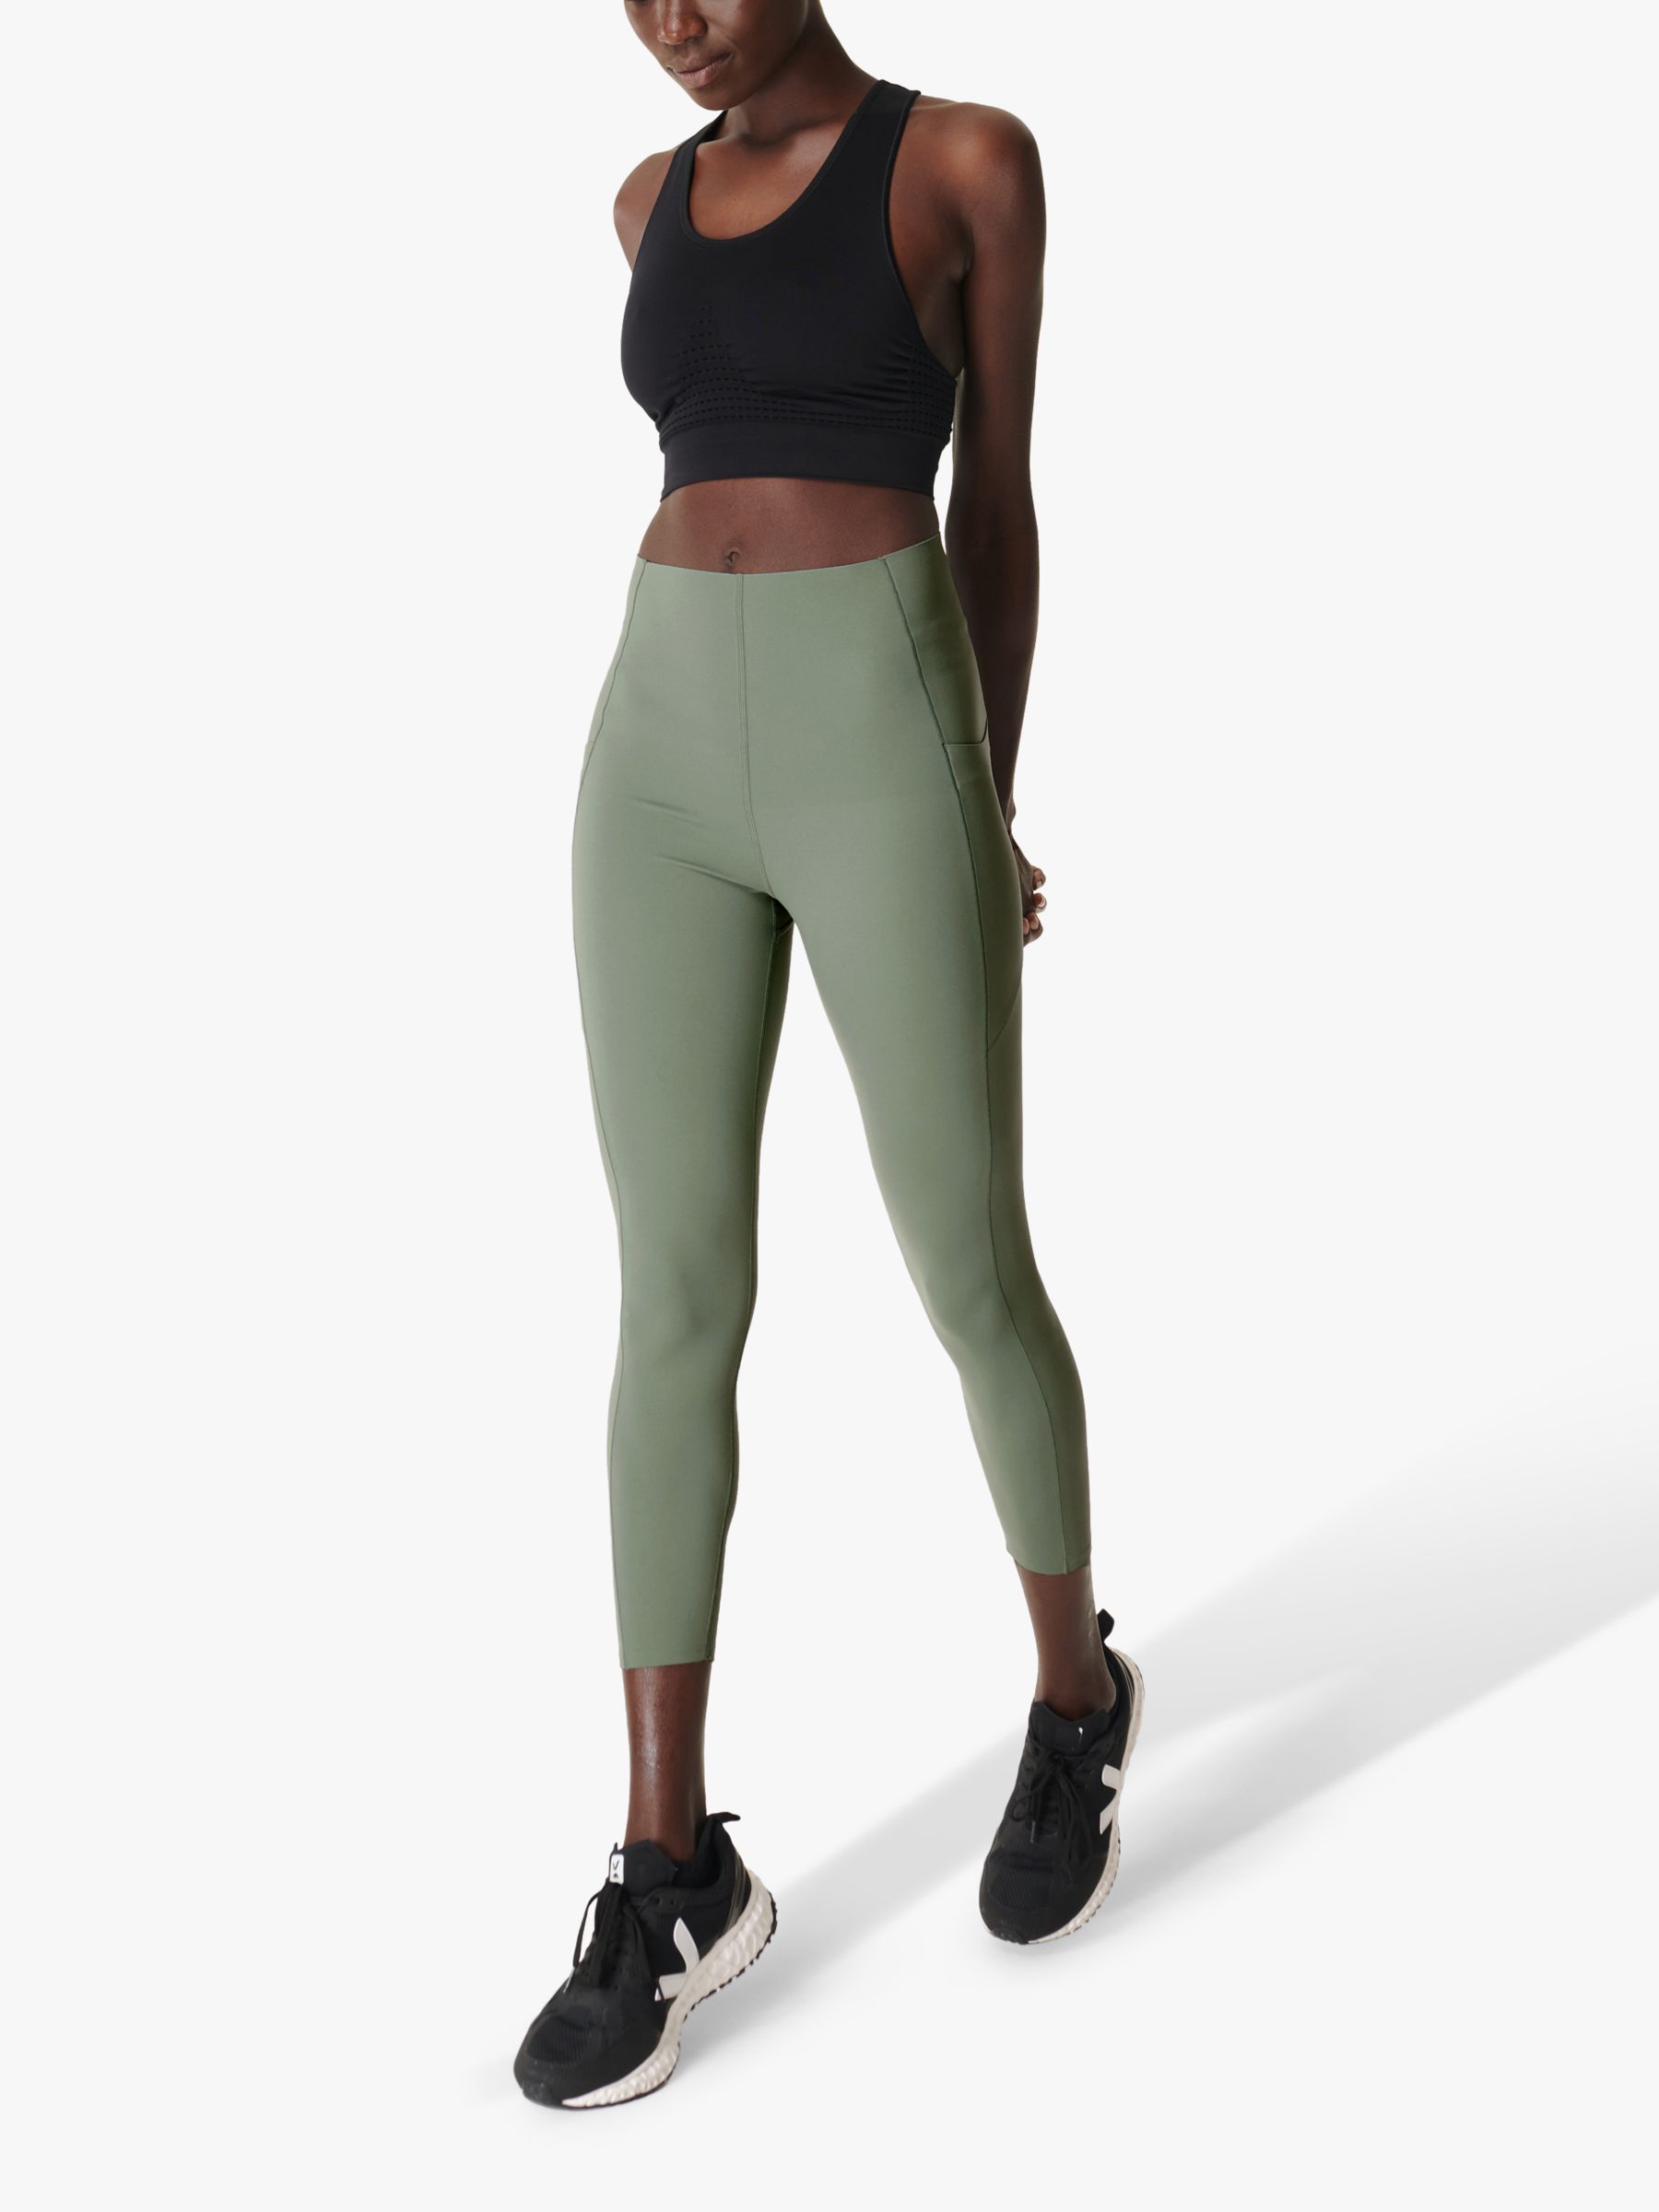 Sweaty Betty Power 7/8 Leggings Reviewers  International Society of  Precision Agriculture